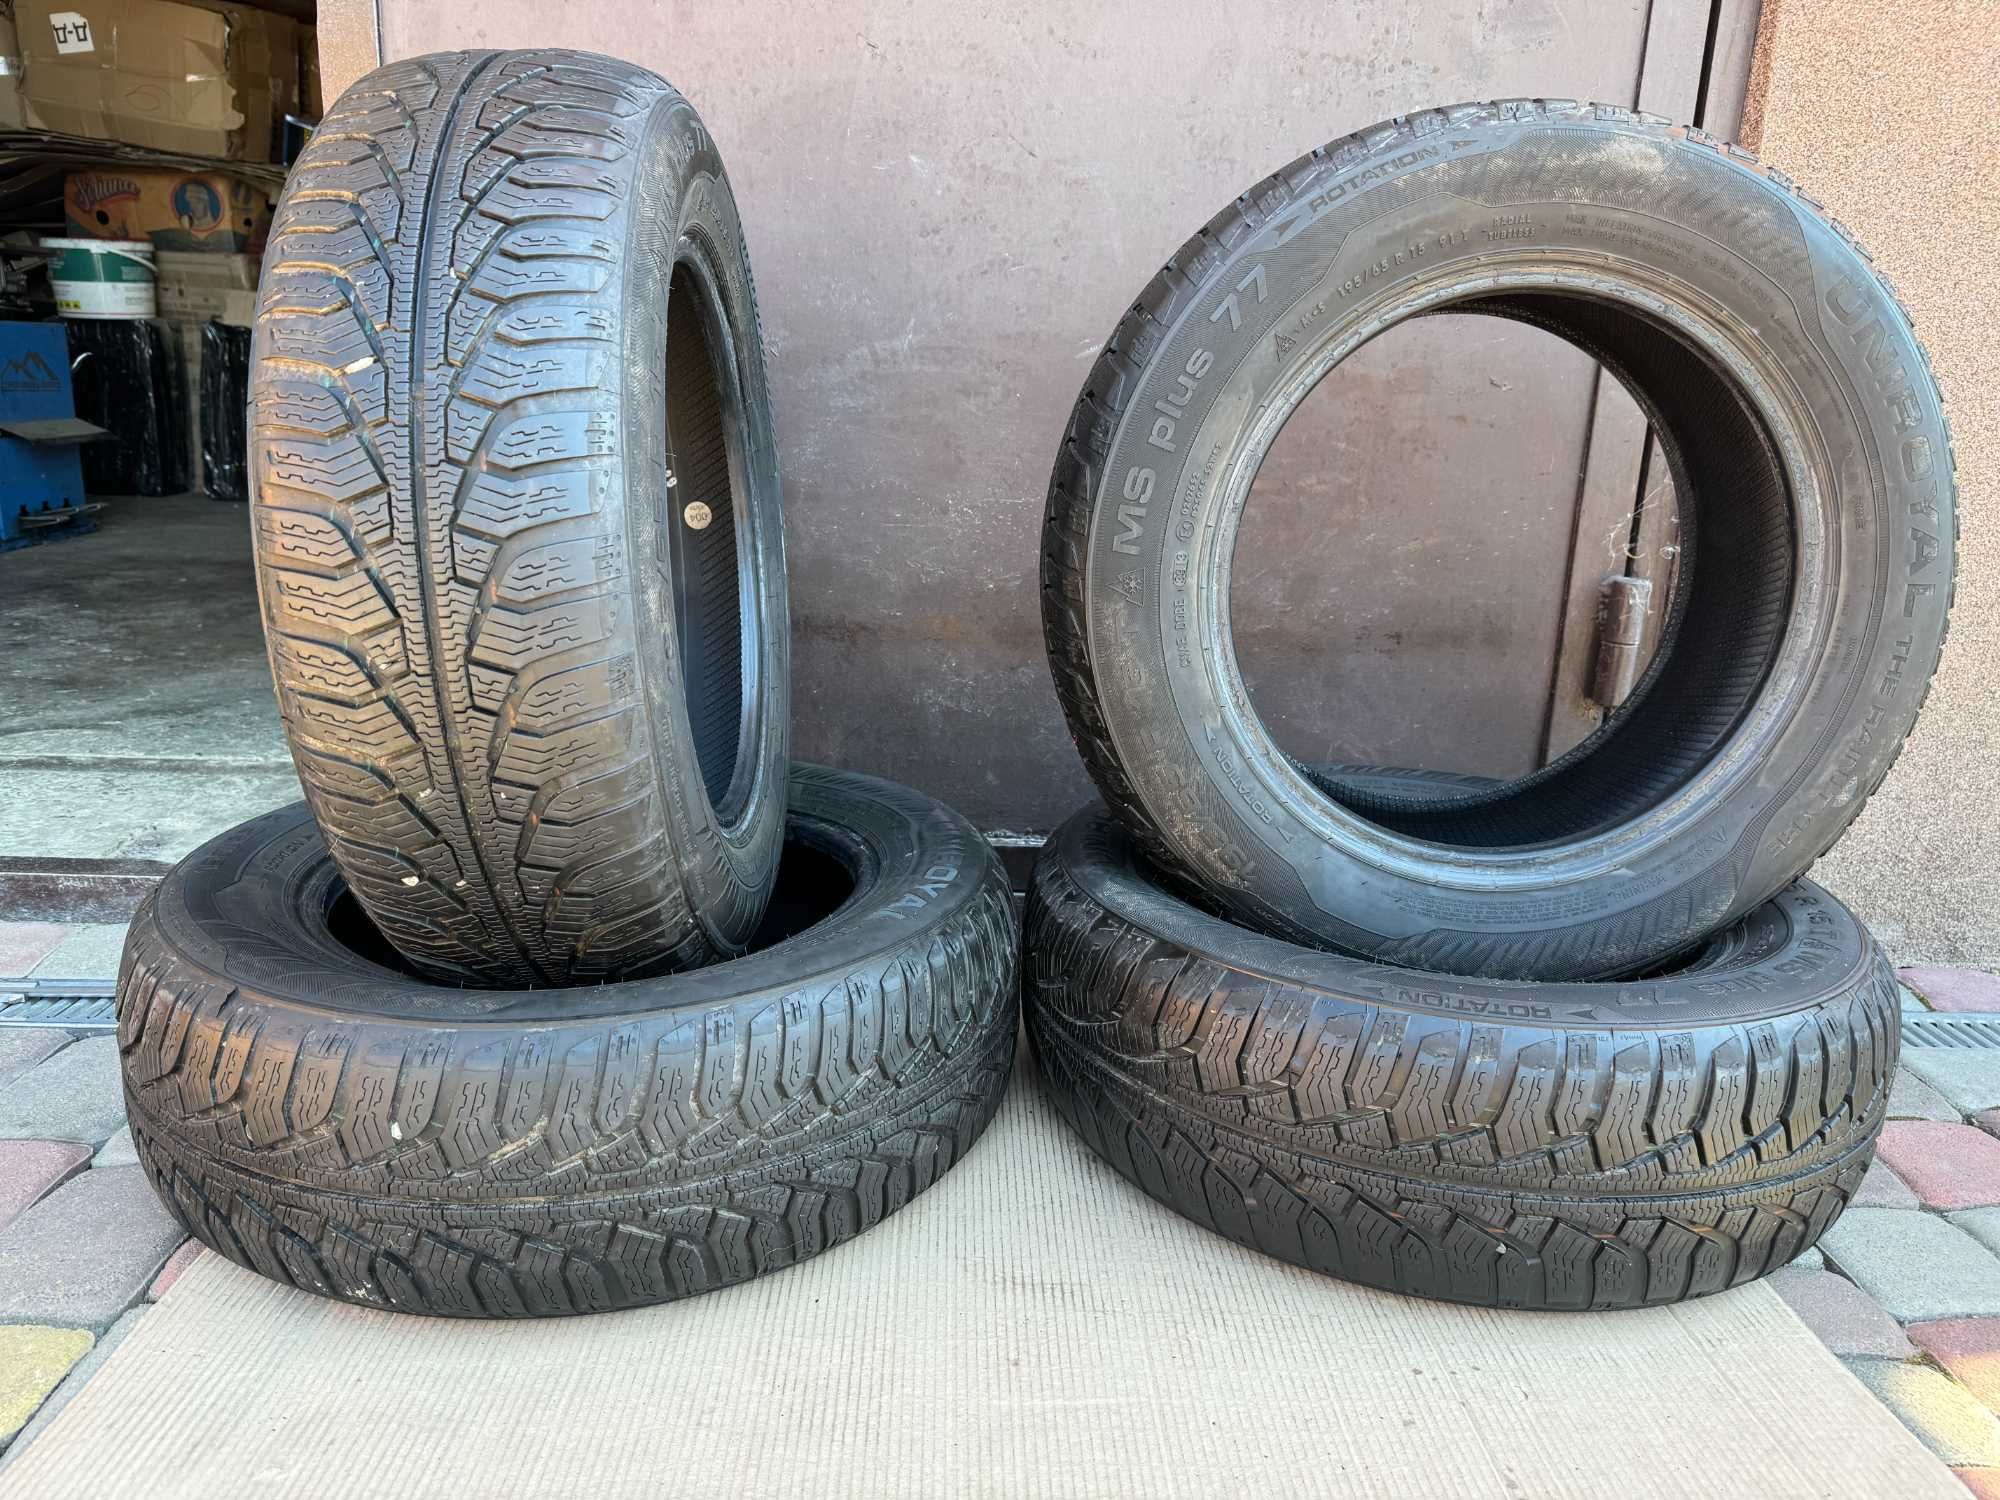 Шини Uniroyal 195/65 R-15 (91 T ) made in France -зима